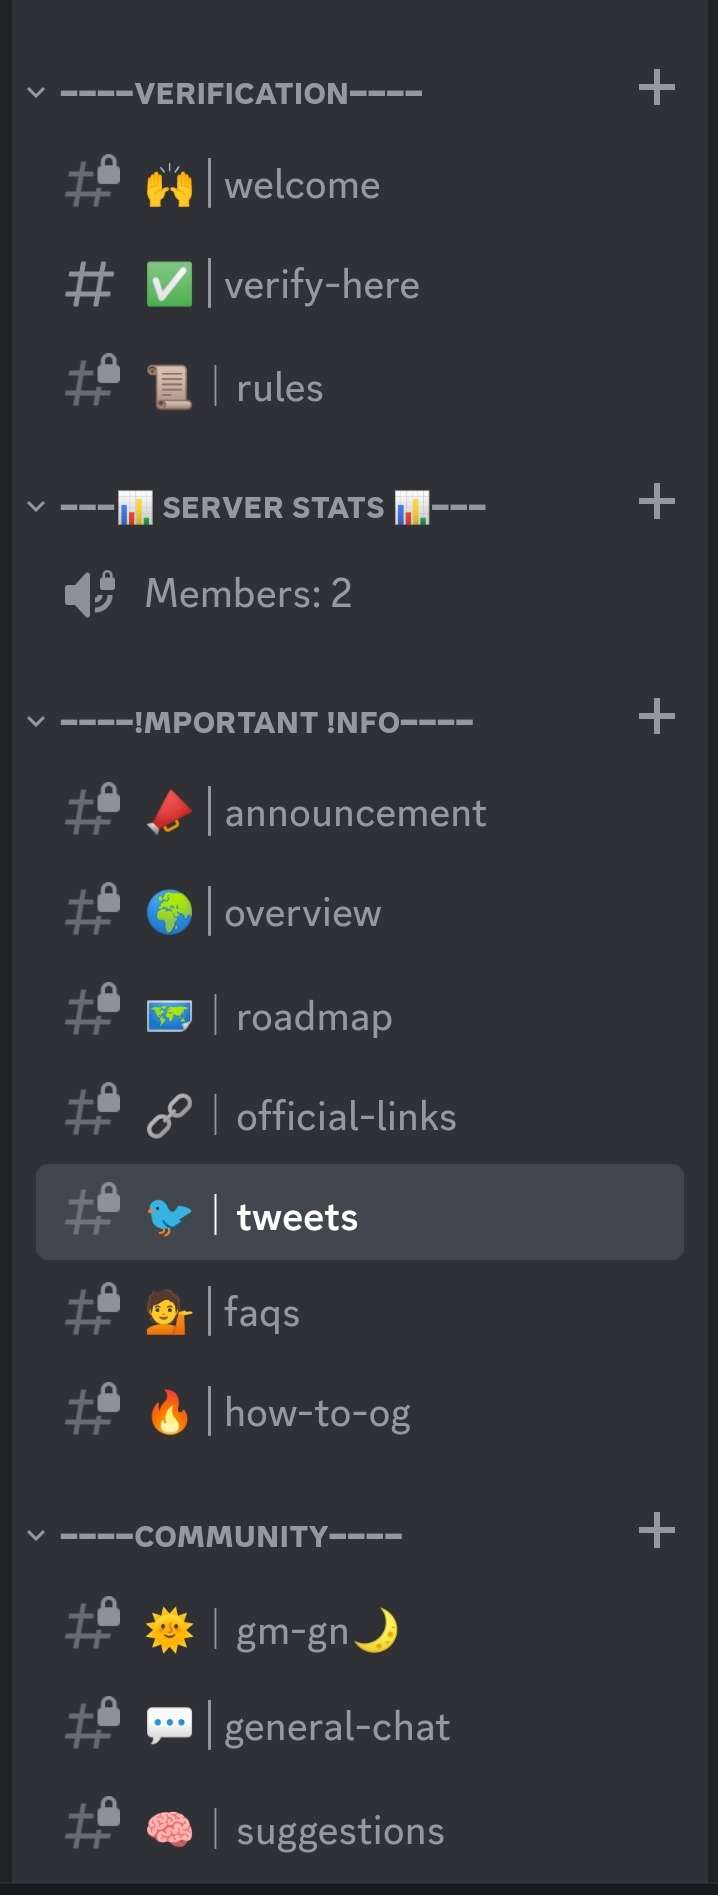 I can build you a professional discord for any project or community